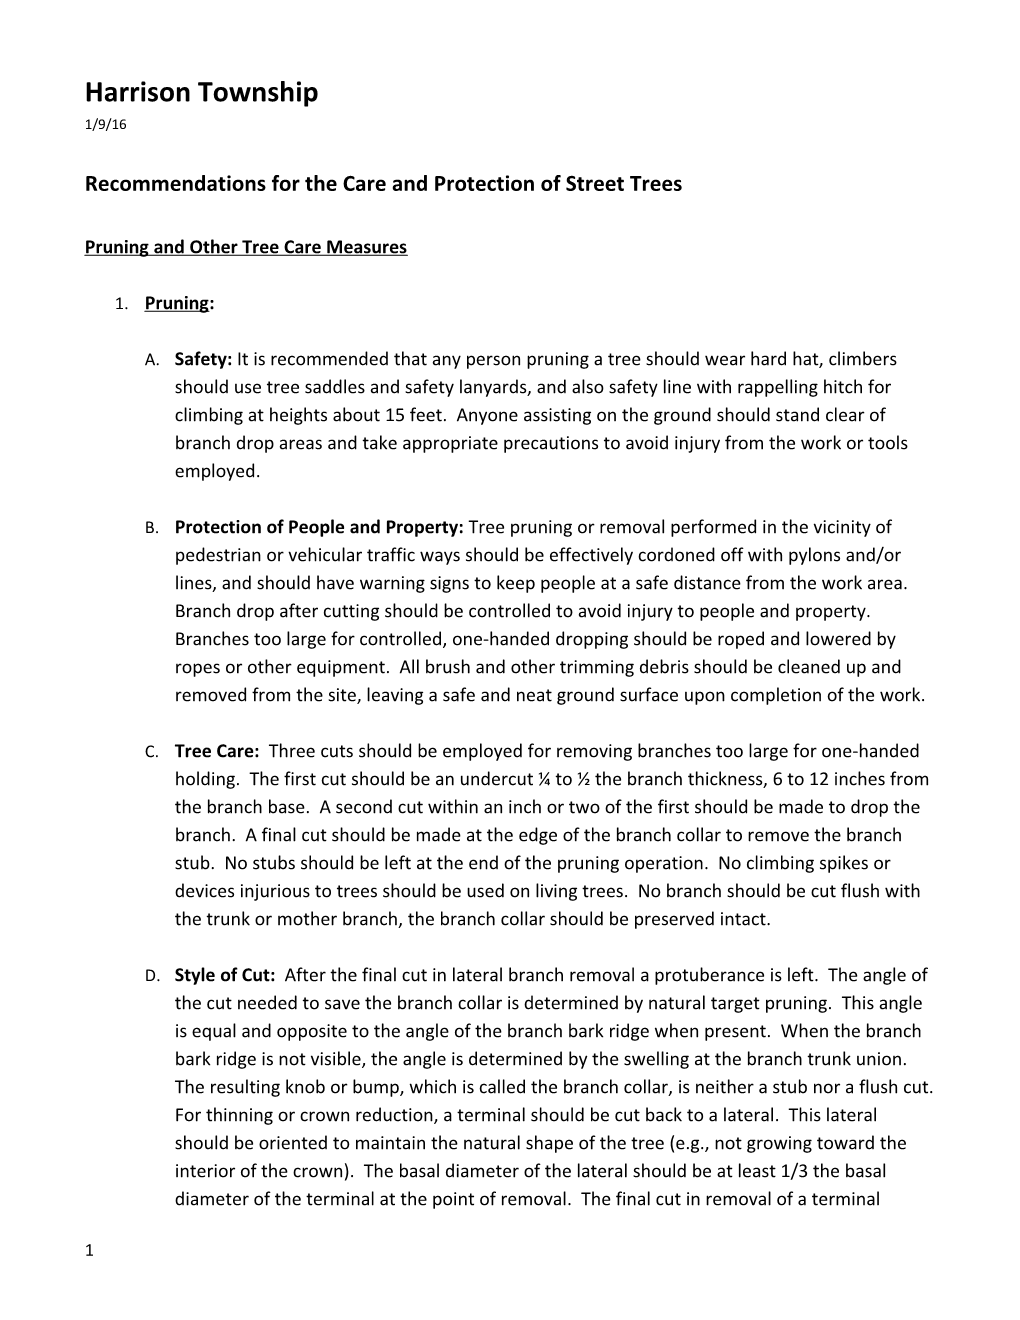 Recommendations for the Care and Protection of Street Trees